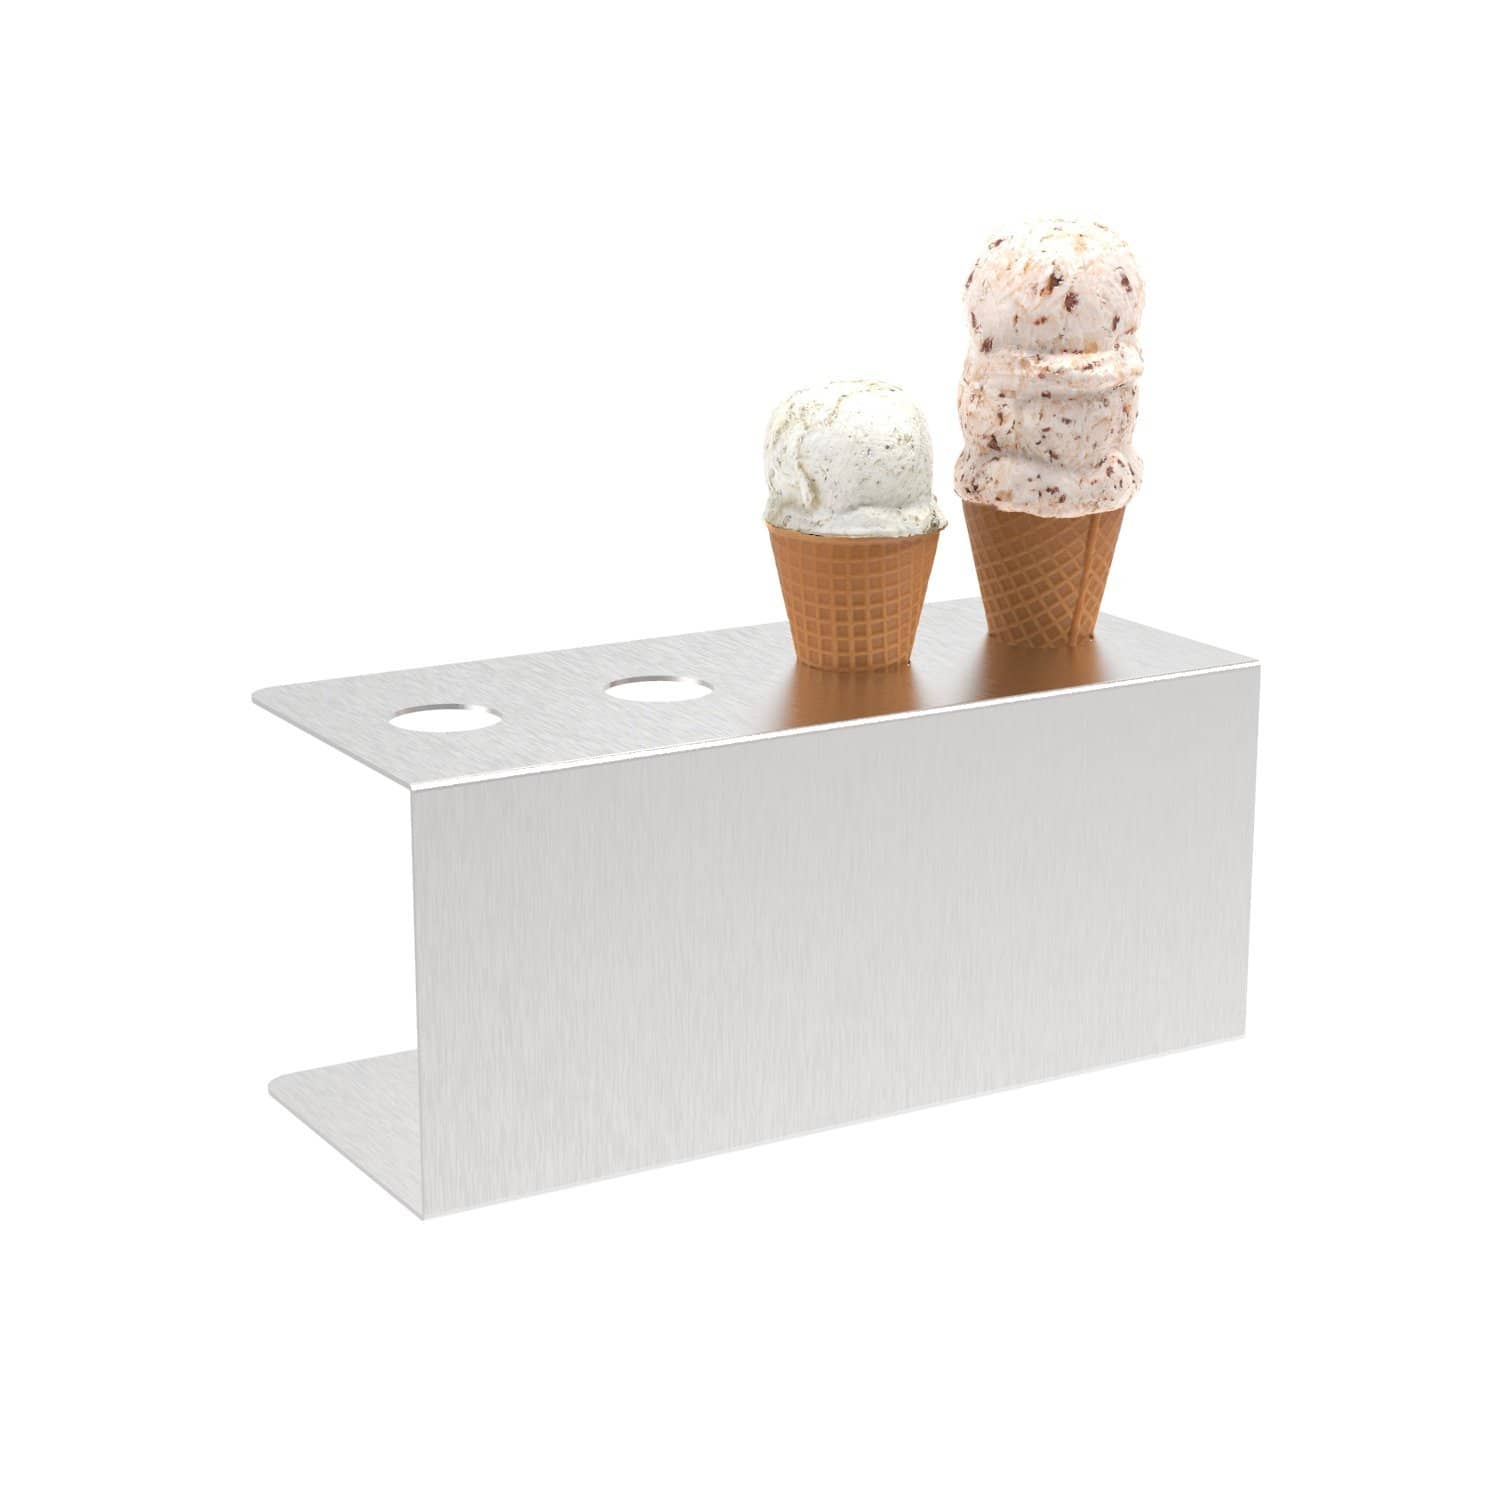 Stainless Steel Ice Cream Cone Stand